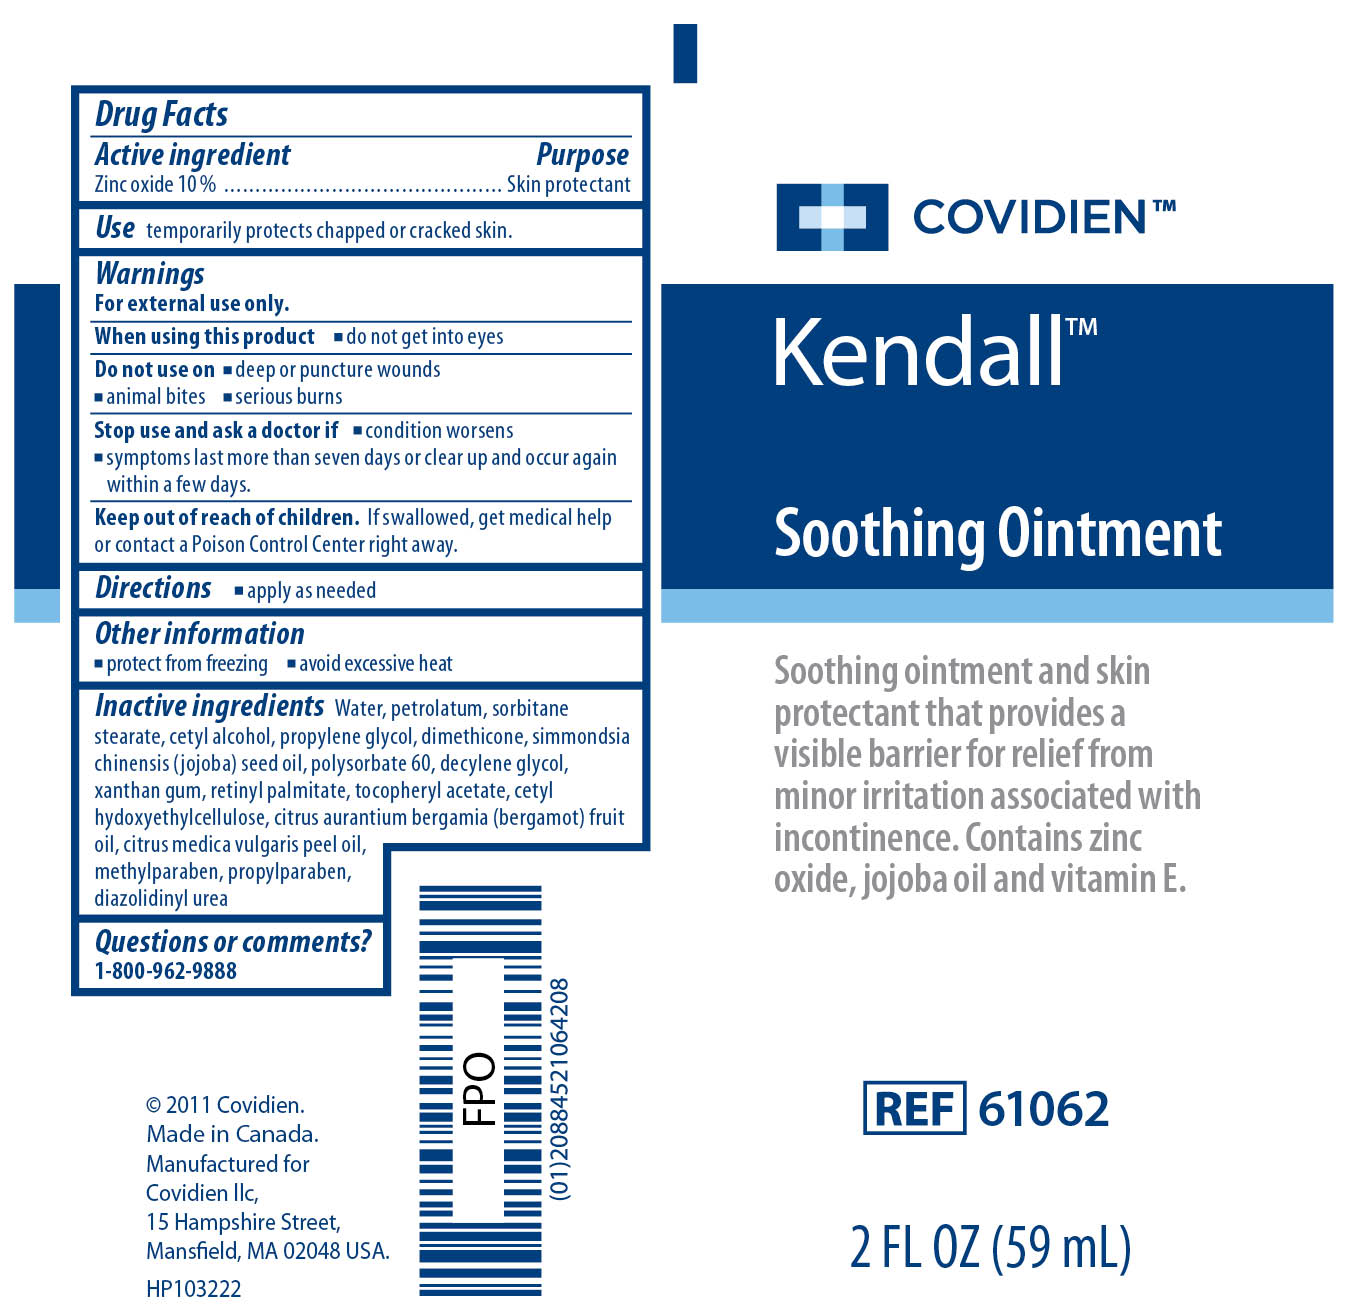 Kendall Soothing Ointment